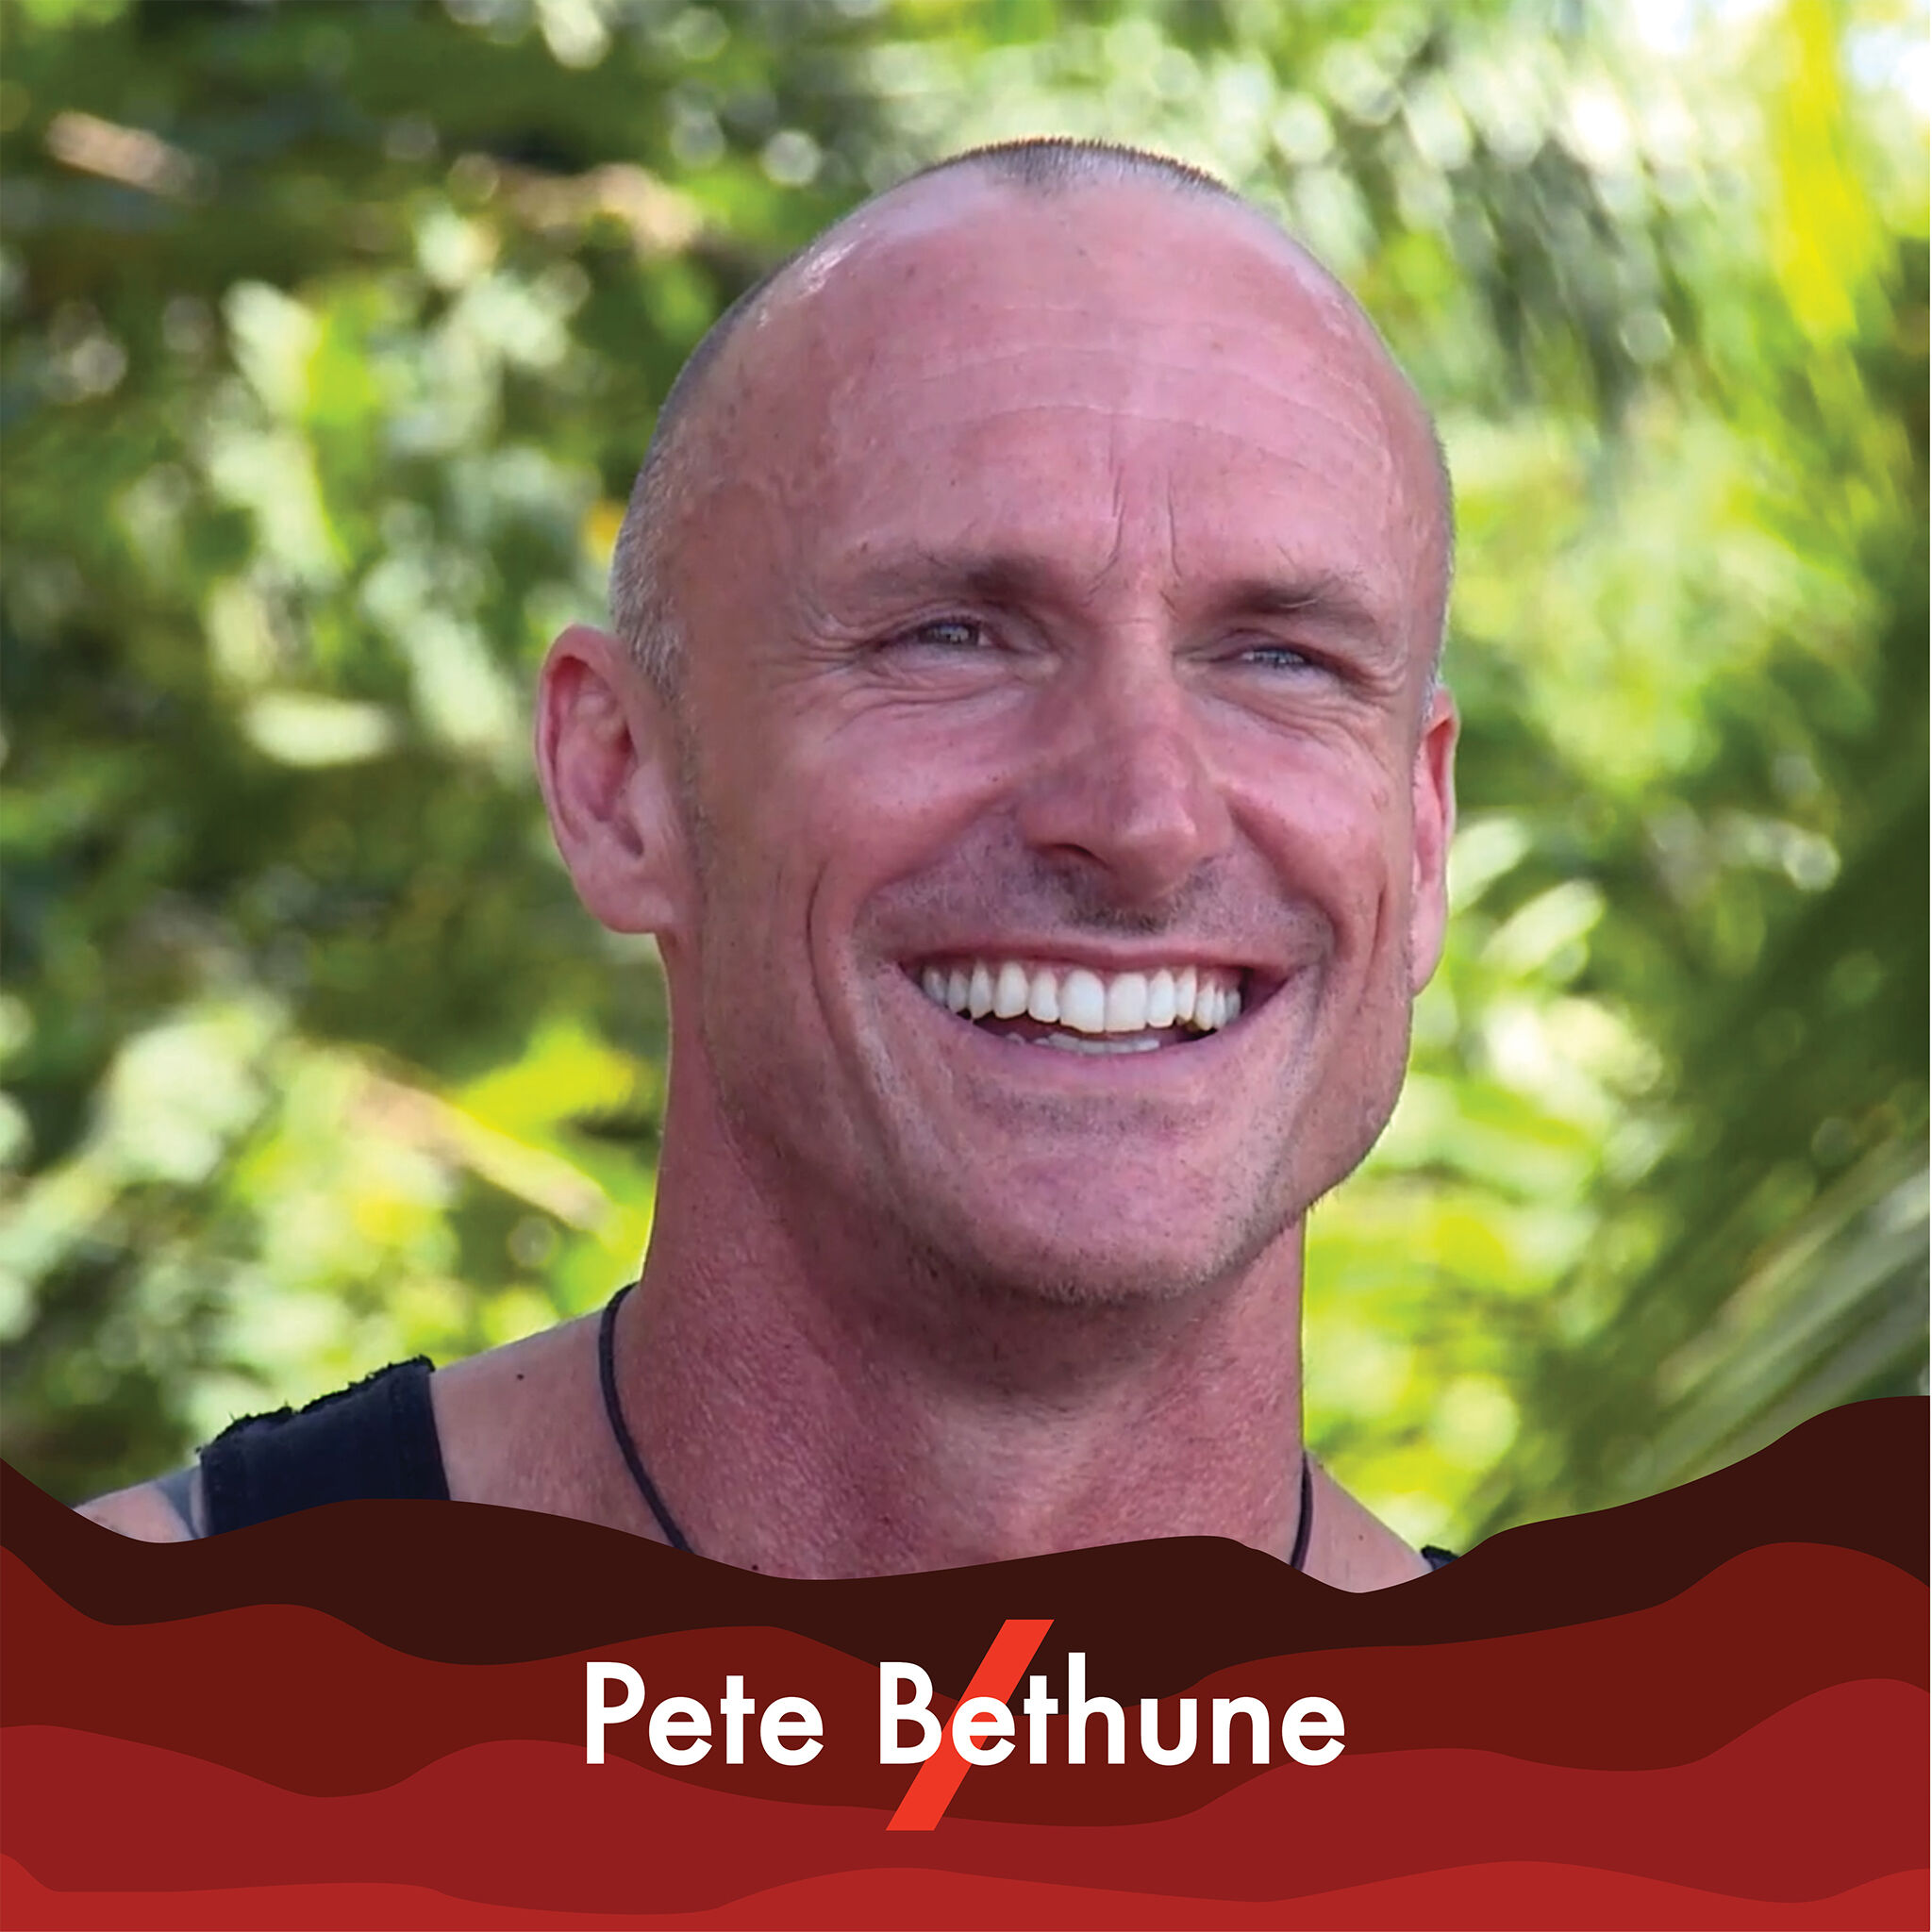 A picture of Pete Bethune